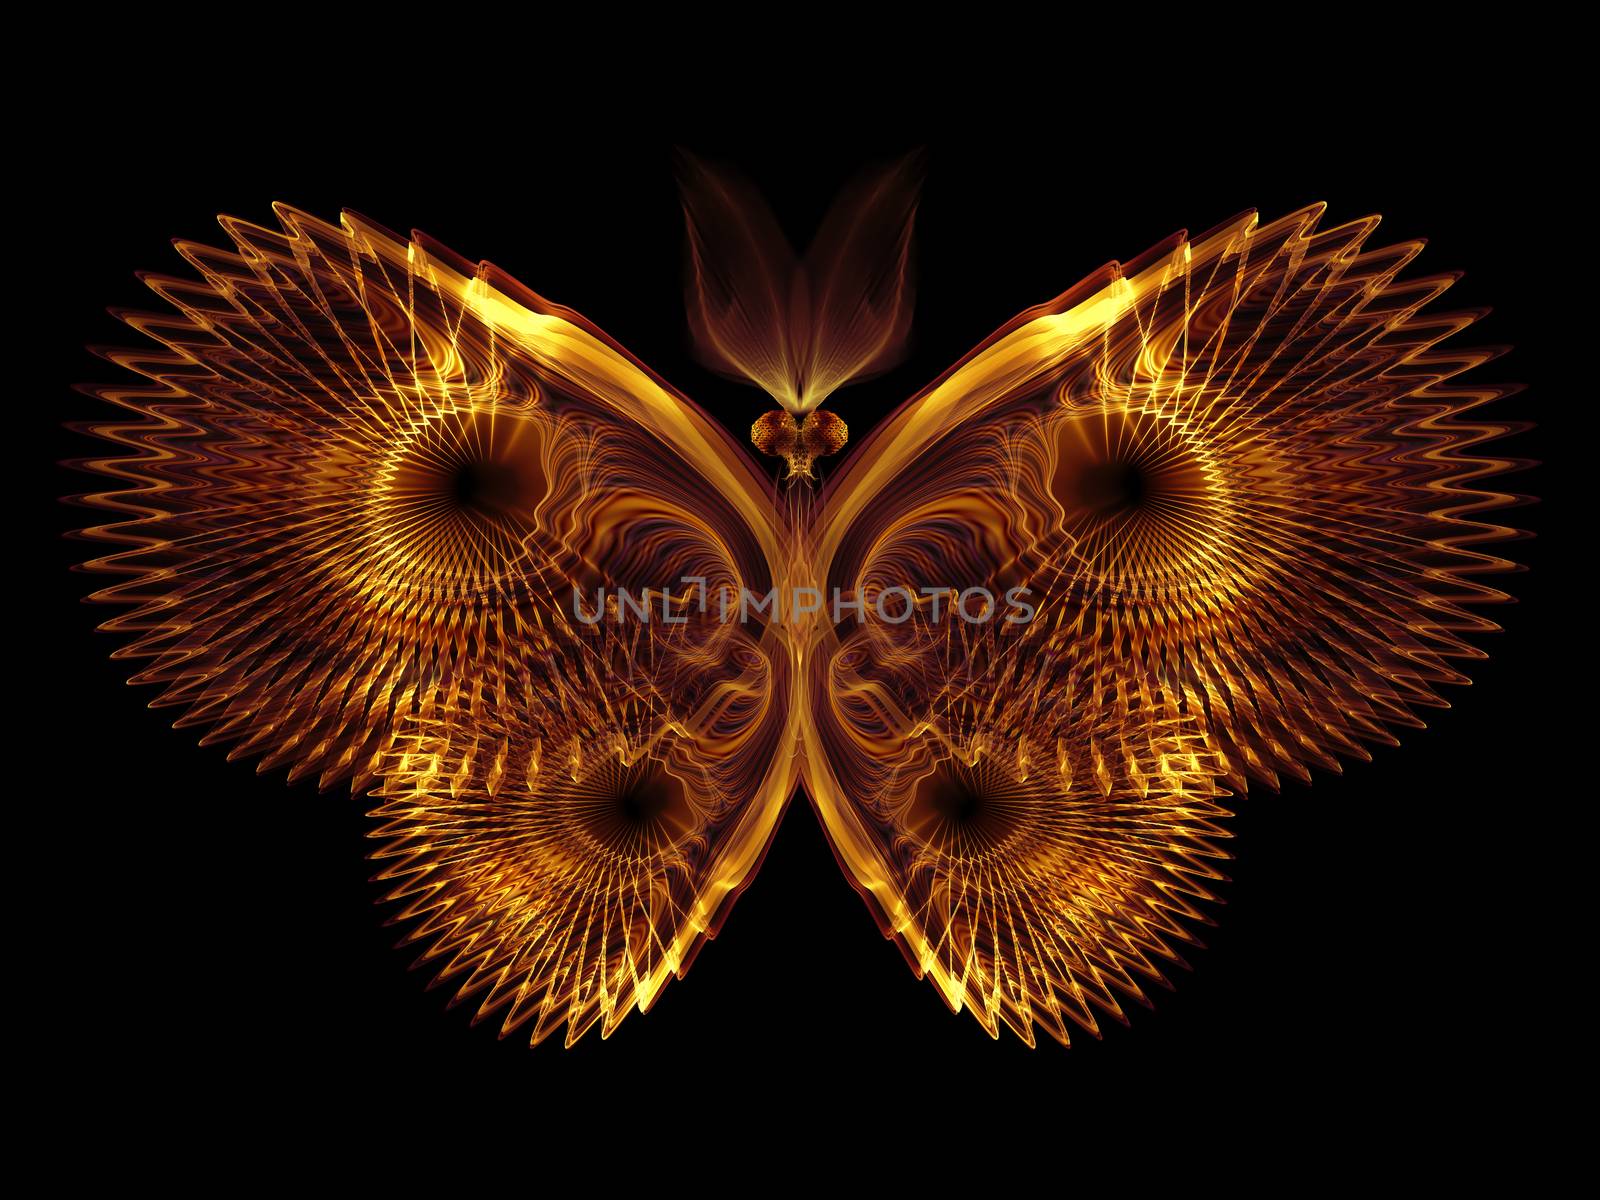 Never Were Butterflies series. Artistic abstraction composed of isolated butterfly patterns on the subject of science, imagination, creativity and design